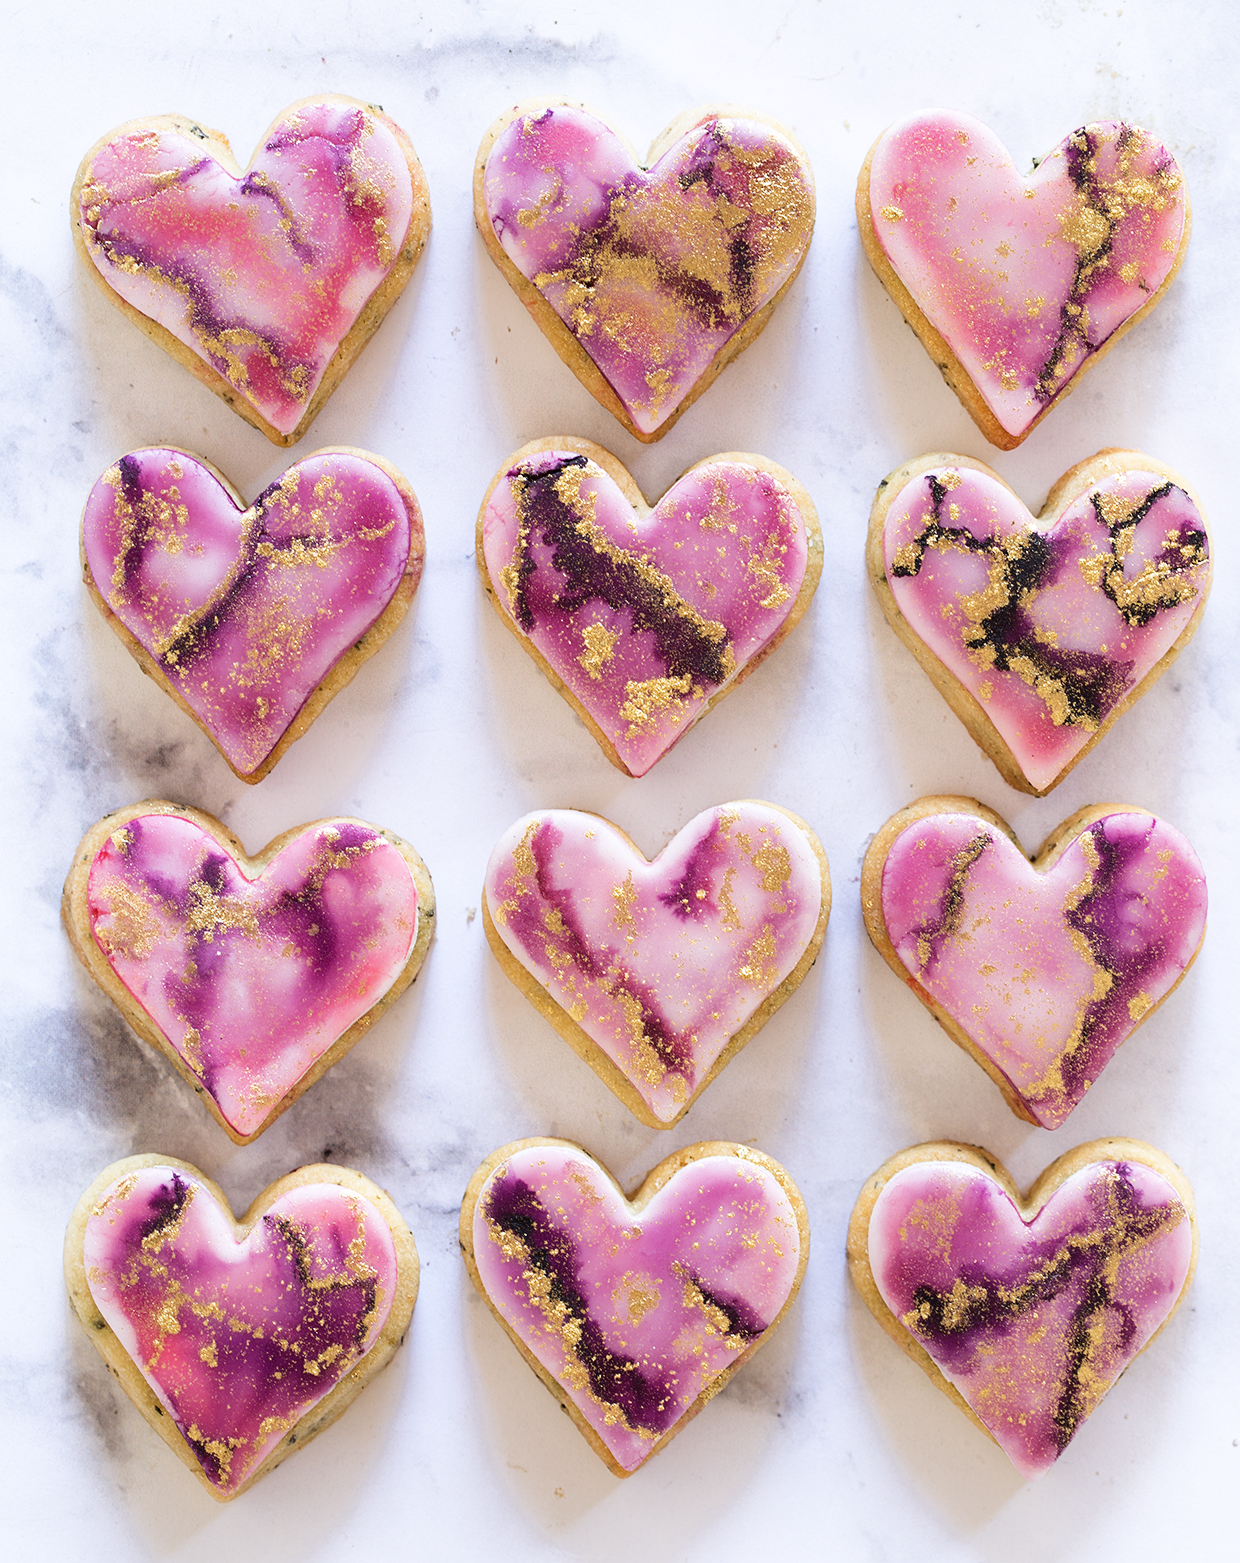 https://www.bakersroyale.com/wp-content/uploads/2018/02/Sugar-Cookies-with-Watercolor-Painted-Marshmallow-Fondant-via-Bakers-Royale.jpg